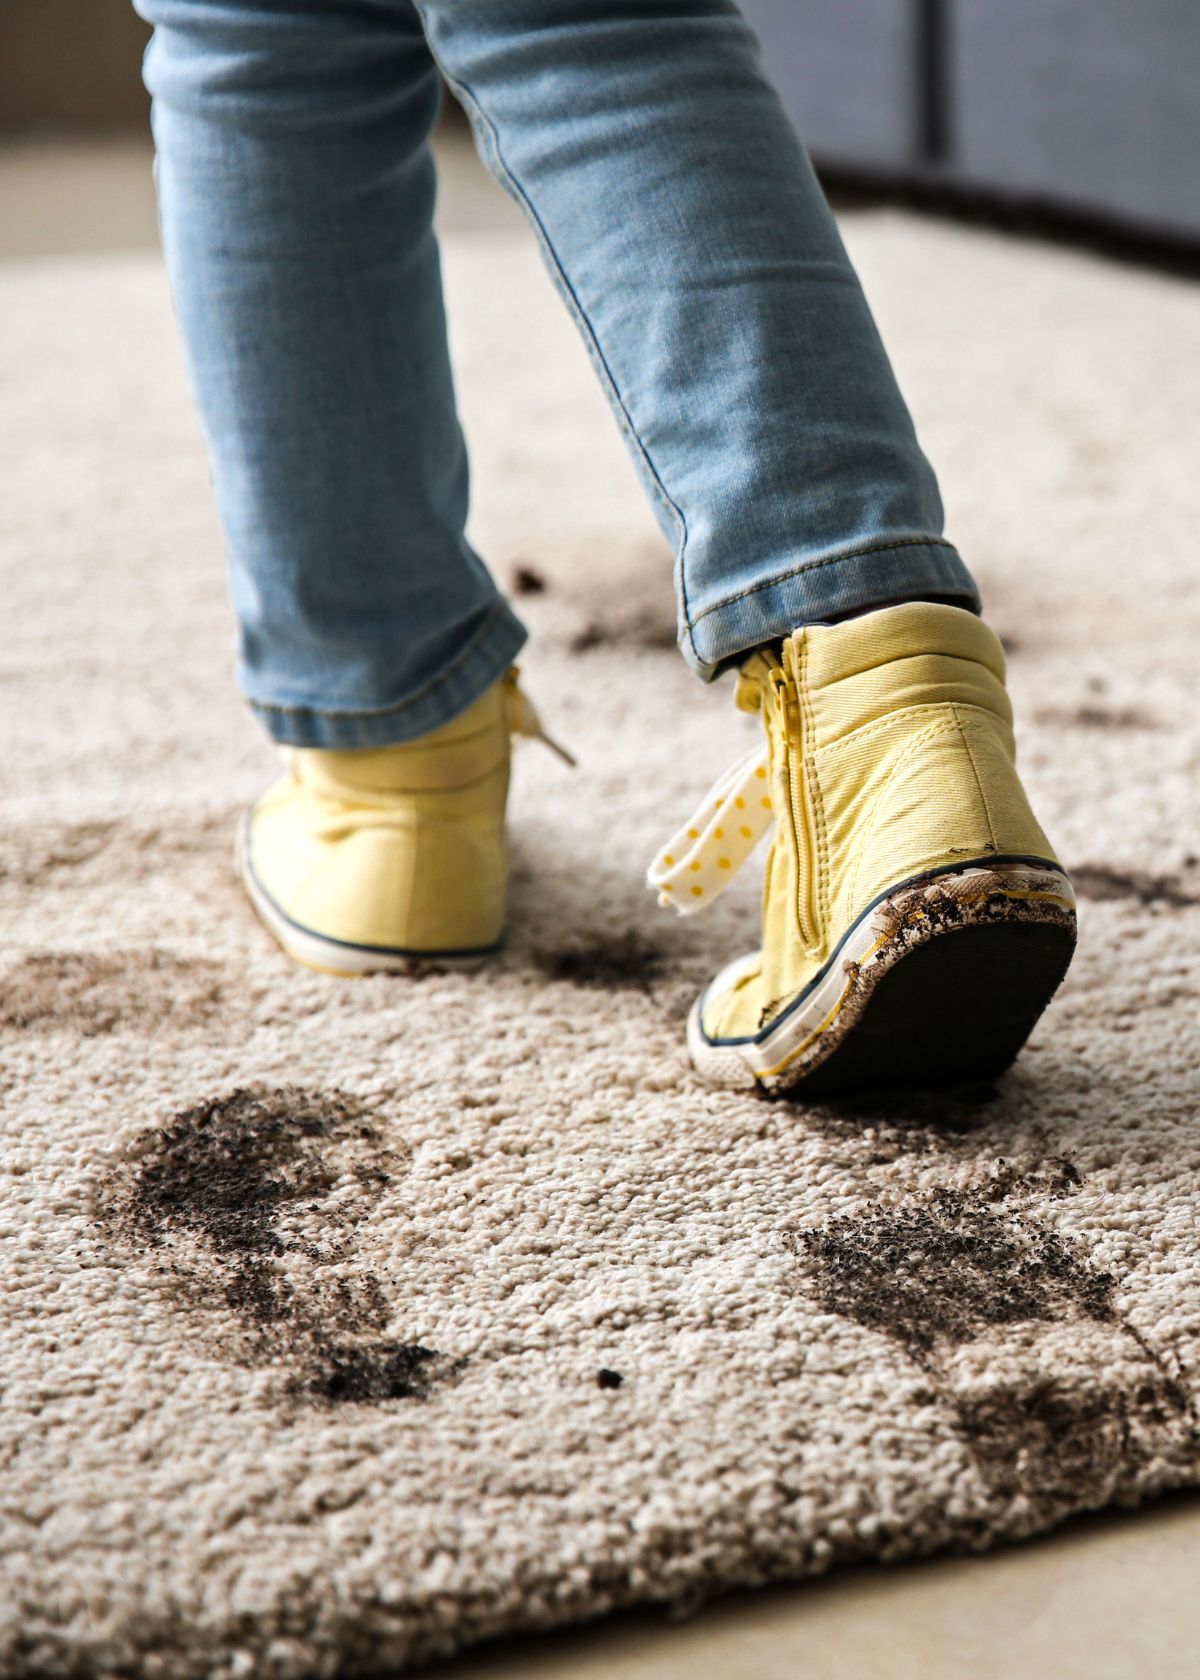 How to Get Mud Out of Carpet